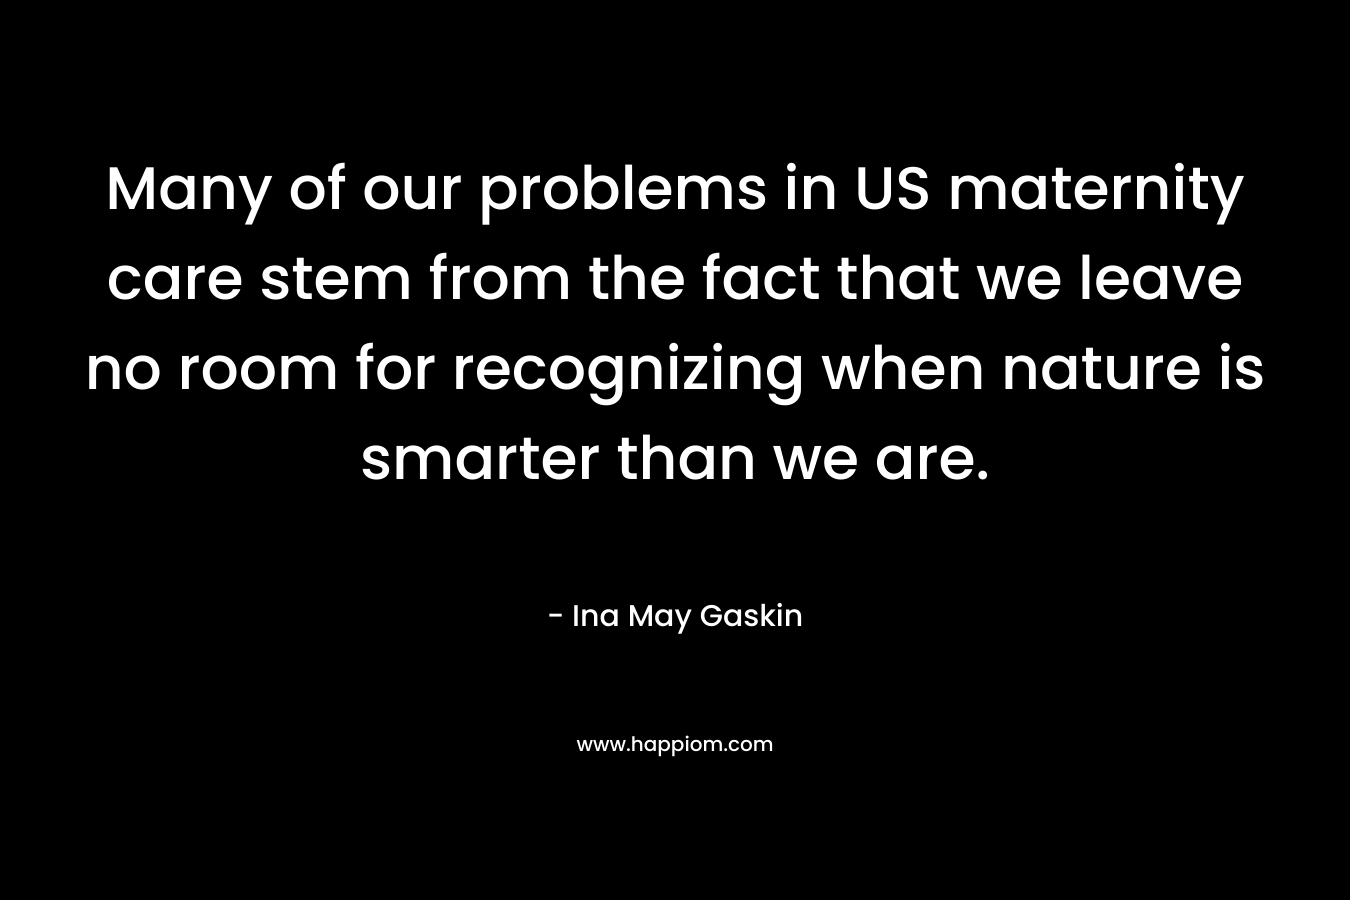 Many of our problems in US maternity care stem from the fact that we leave no room for recognizing when nature is smarter than we are. – Ina May Gaskin